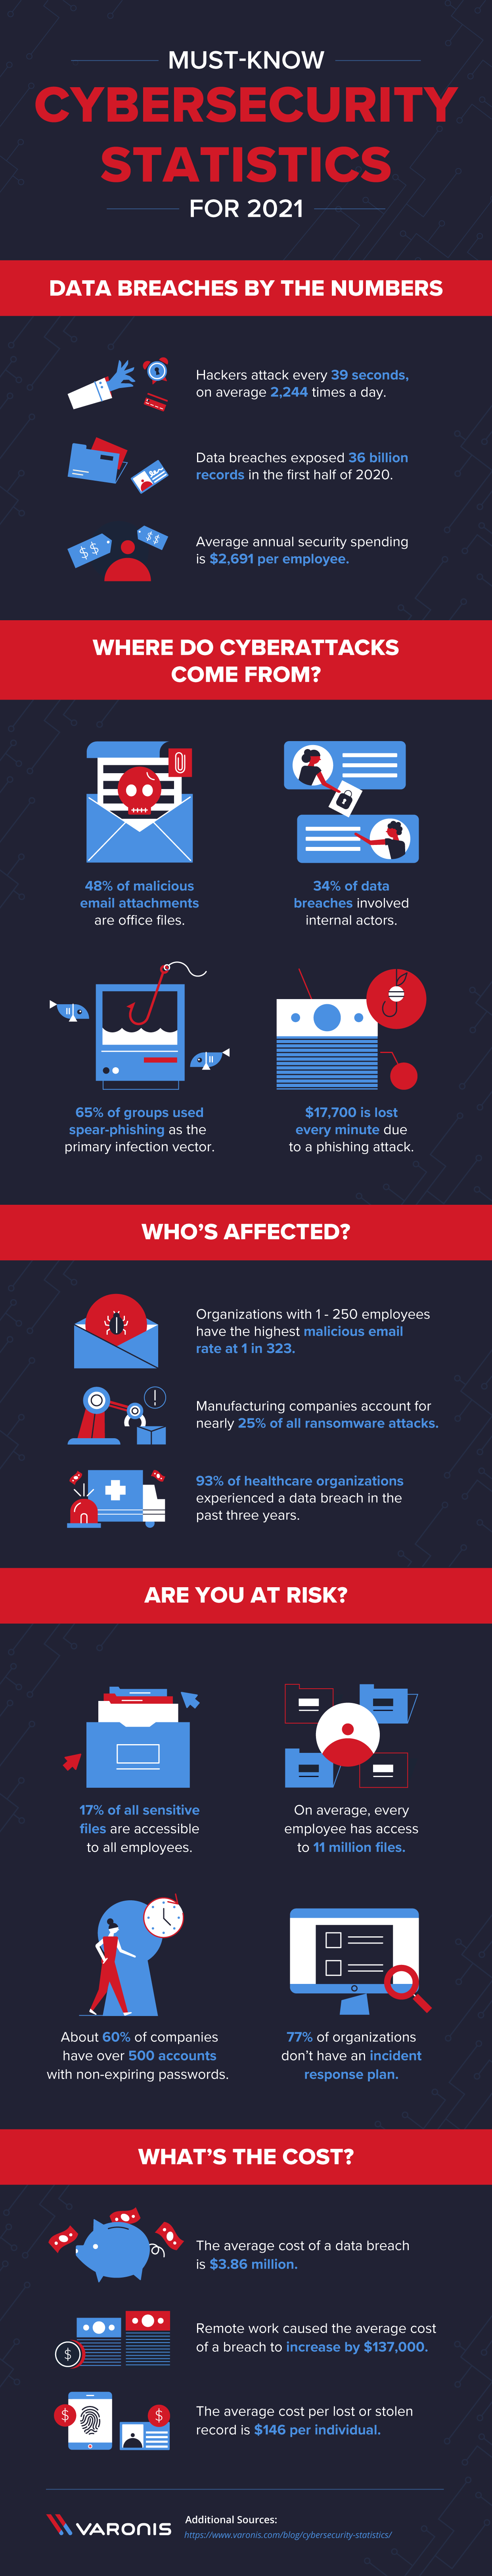 an infographic of cybersecurity statistics to know in 2021, include data breaches and how much cyber threats cost